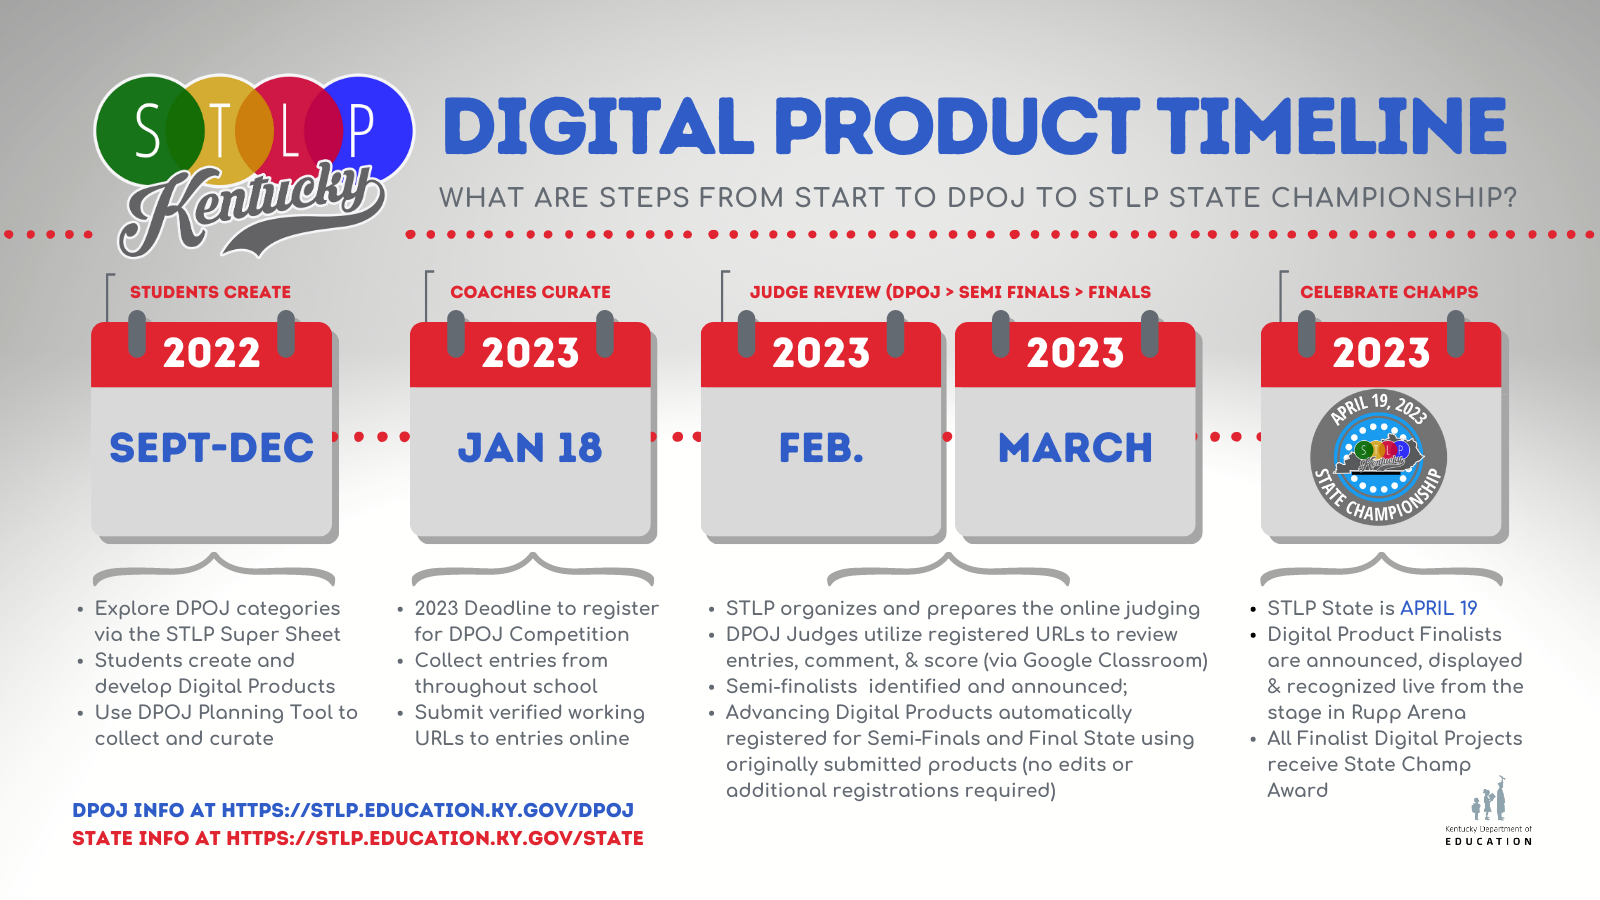 The Digital Product Timeline demonstrates what happens to student digital products from the start of the school year until the State Championship